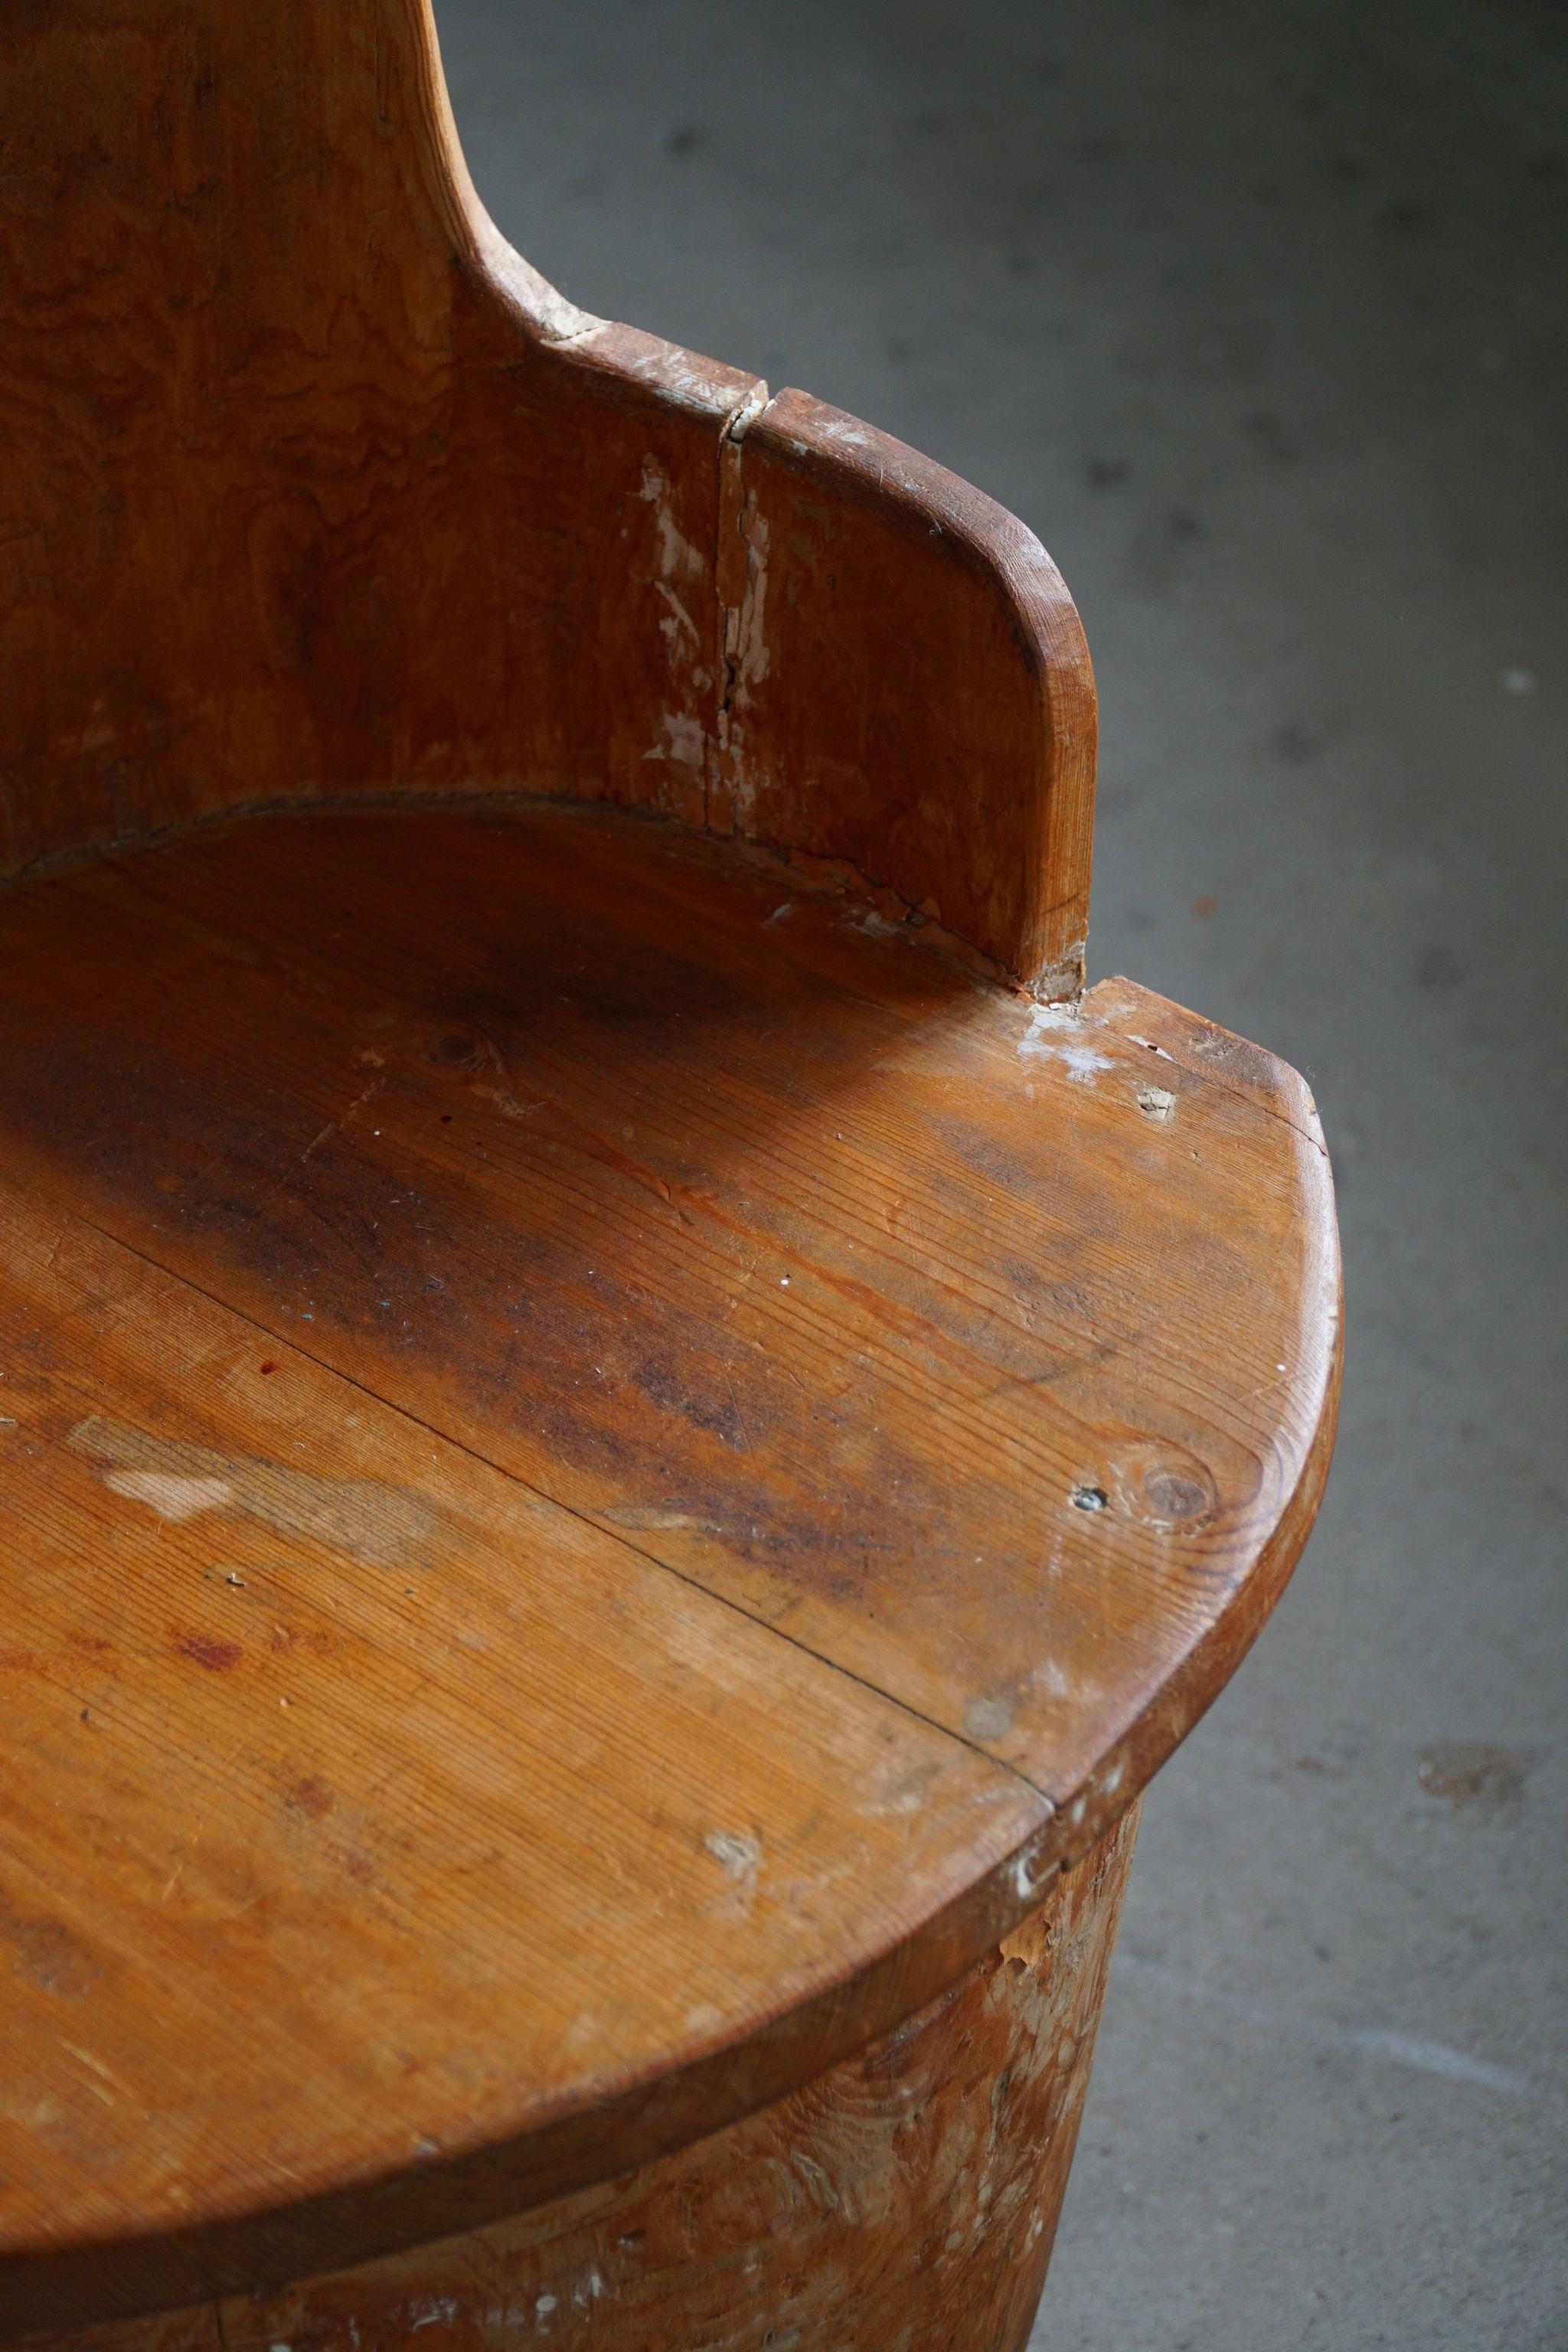 Mid 20th Century Wabi Sabi Stump Chair in Pine, by a Swedish Cabinetmaker, 1950s For Sale 1